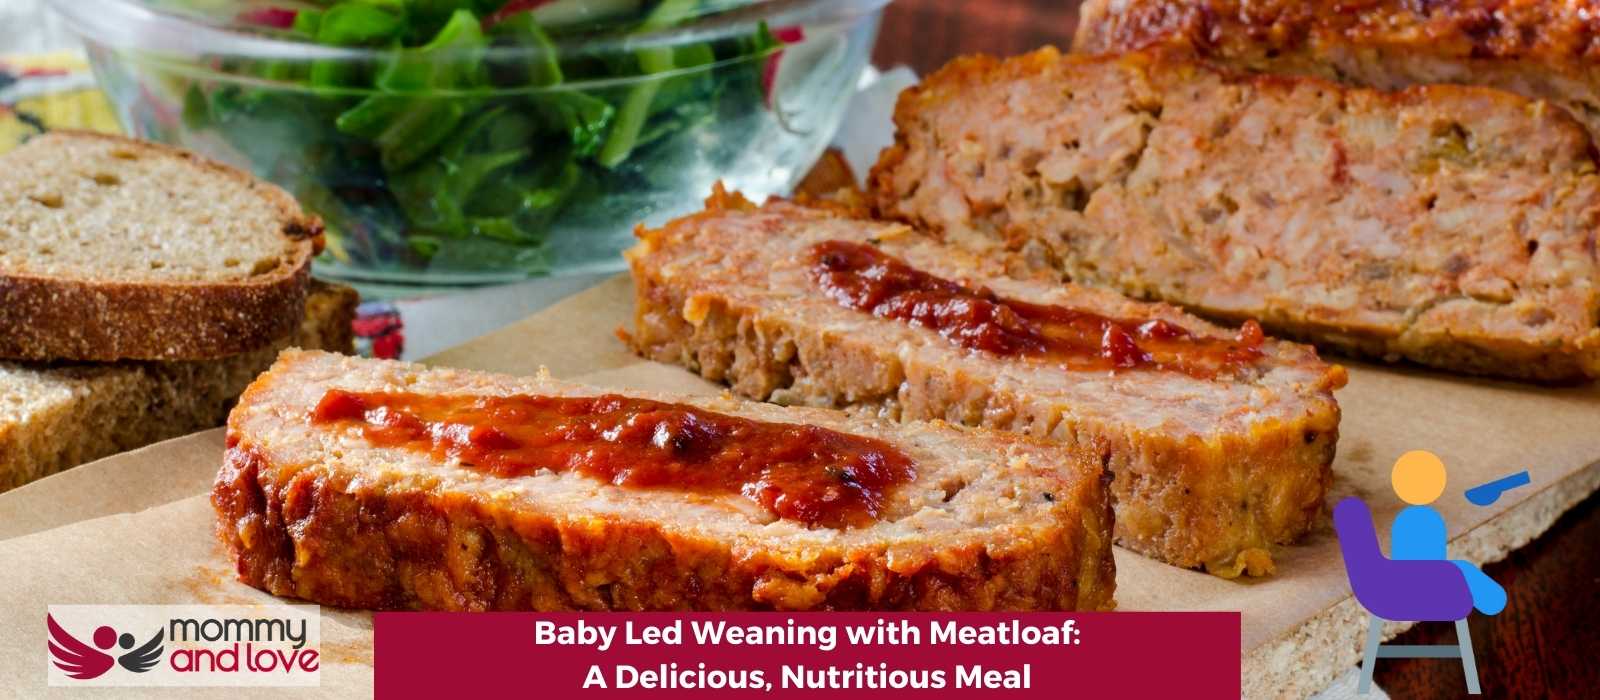 Baby Led Weaning with Meatloaf A Delicious, Nutritious Meal